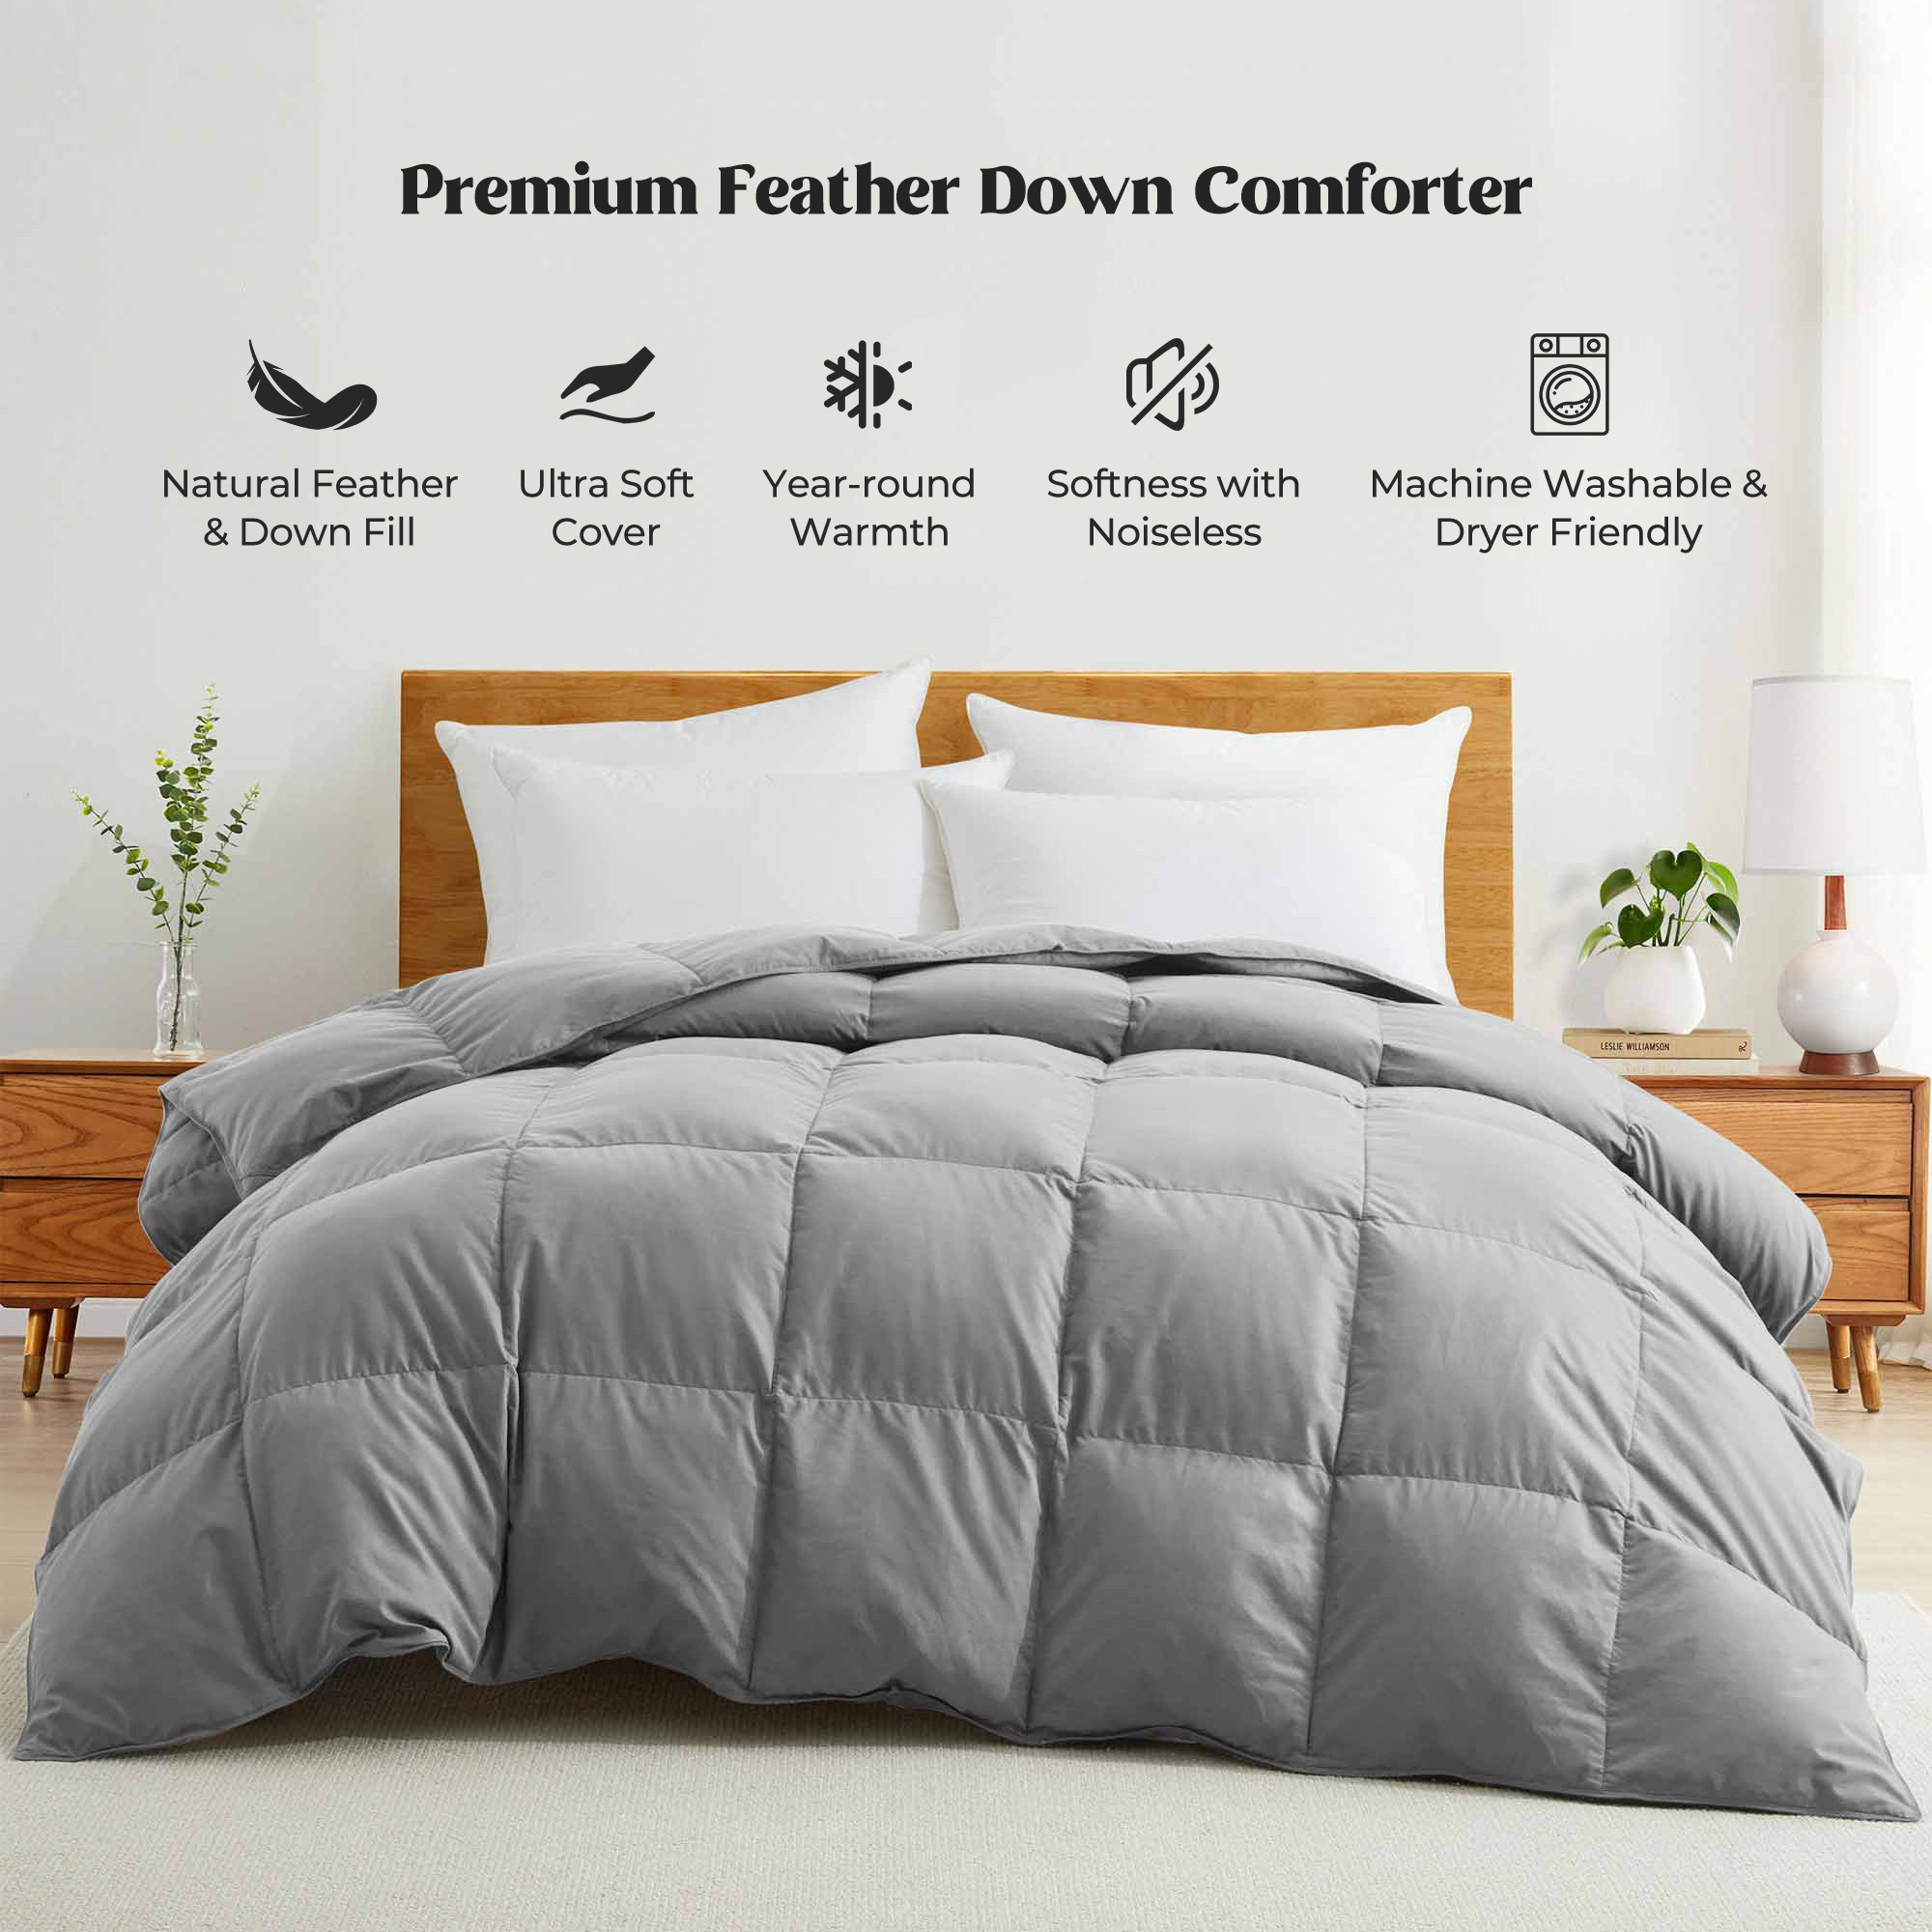 All Seasons Goose Down Feather Comforter Ultra Soft Comforter With Peach Skin Fabric - Whale Grey, Twin-68*88